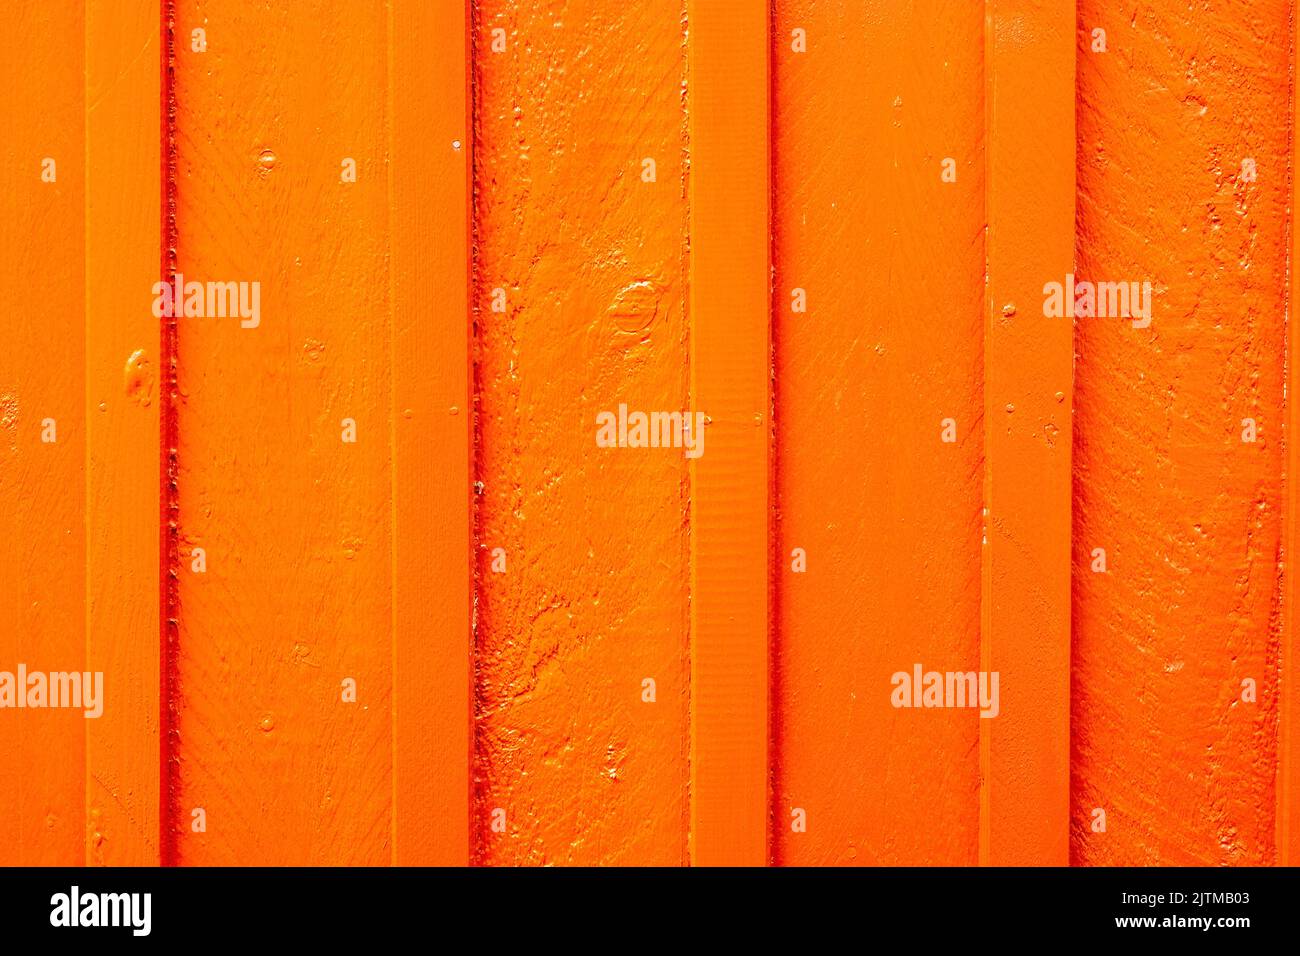 Background orange wall made of painted wooden planks Stock Photo